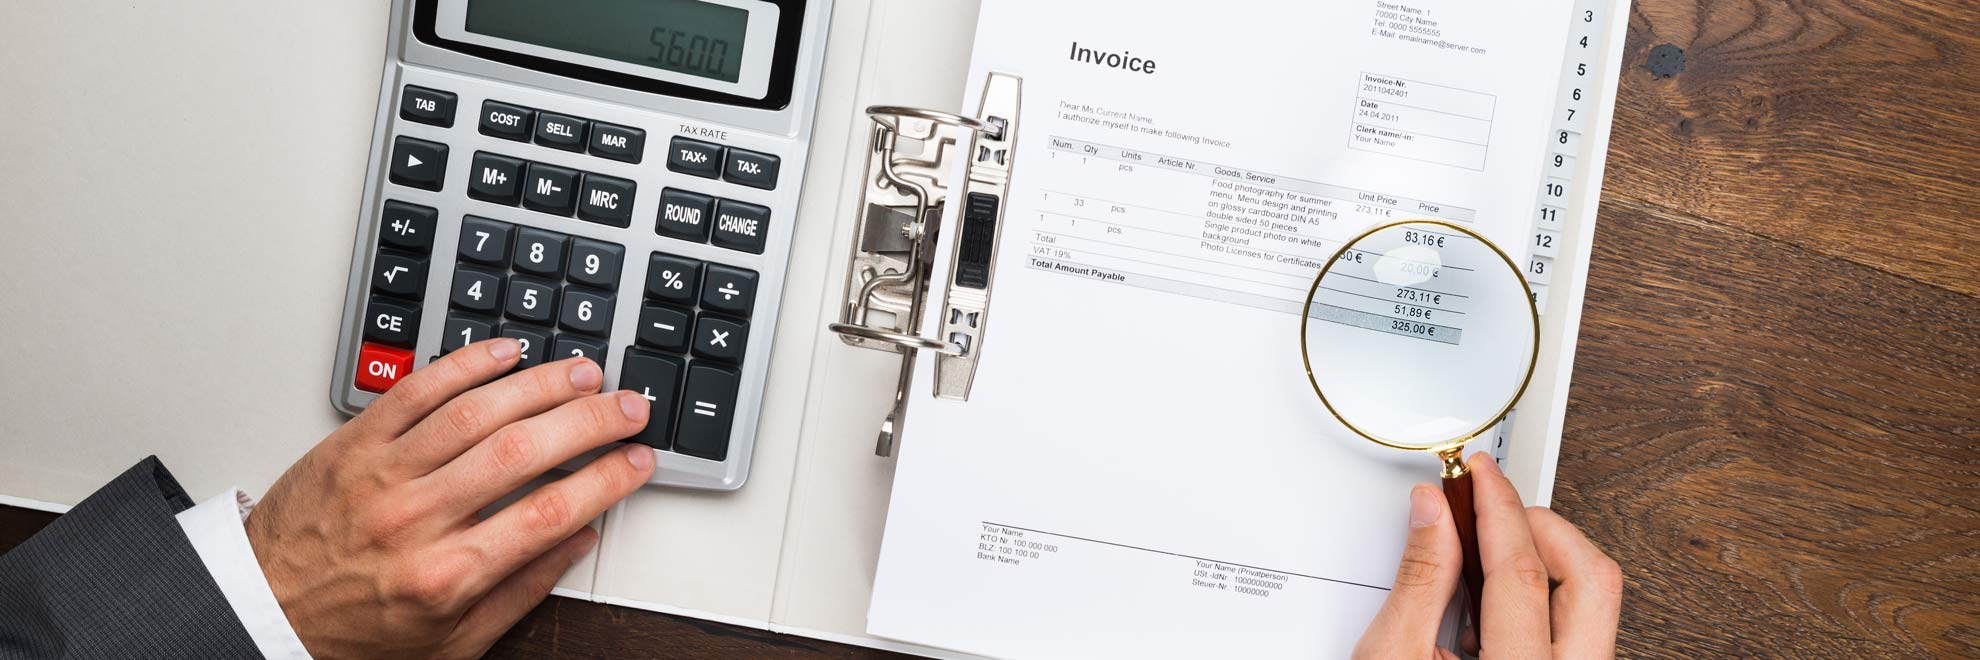 magnifying glass invoice